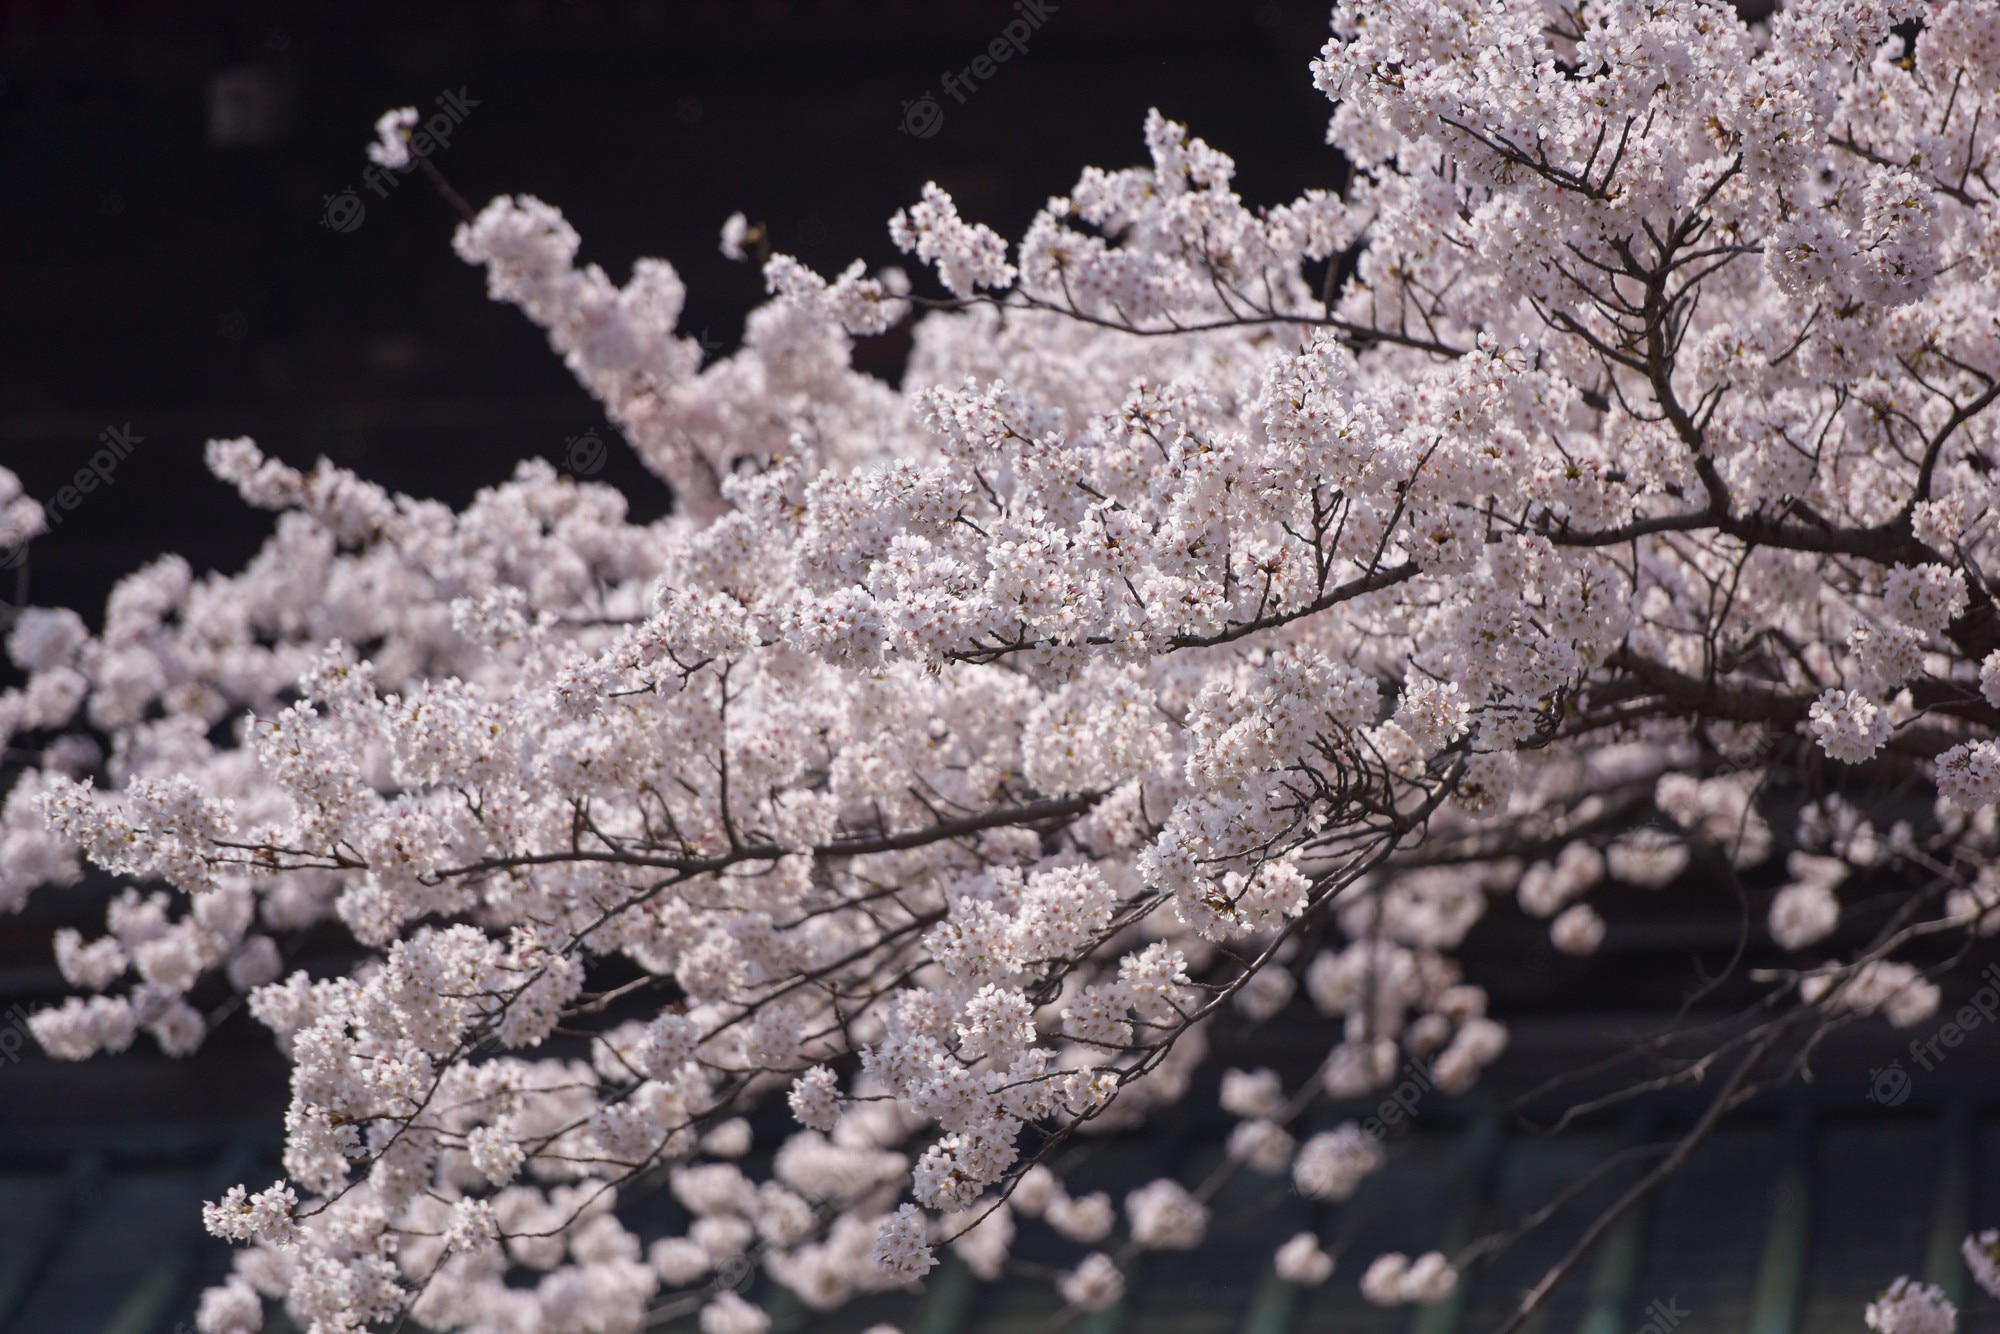 Premium Photo. Pretty and lovely pink cherry blossoms wallpaper background, tokyo japan, soft focus